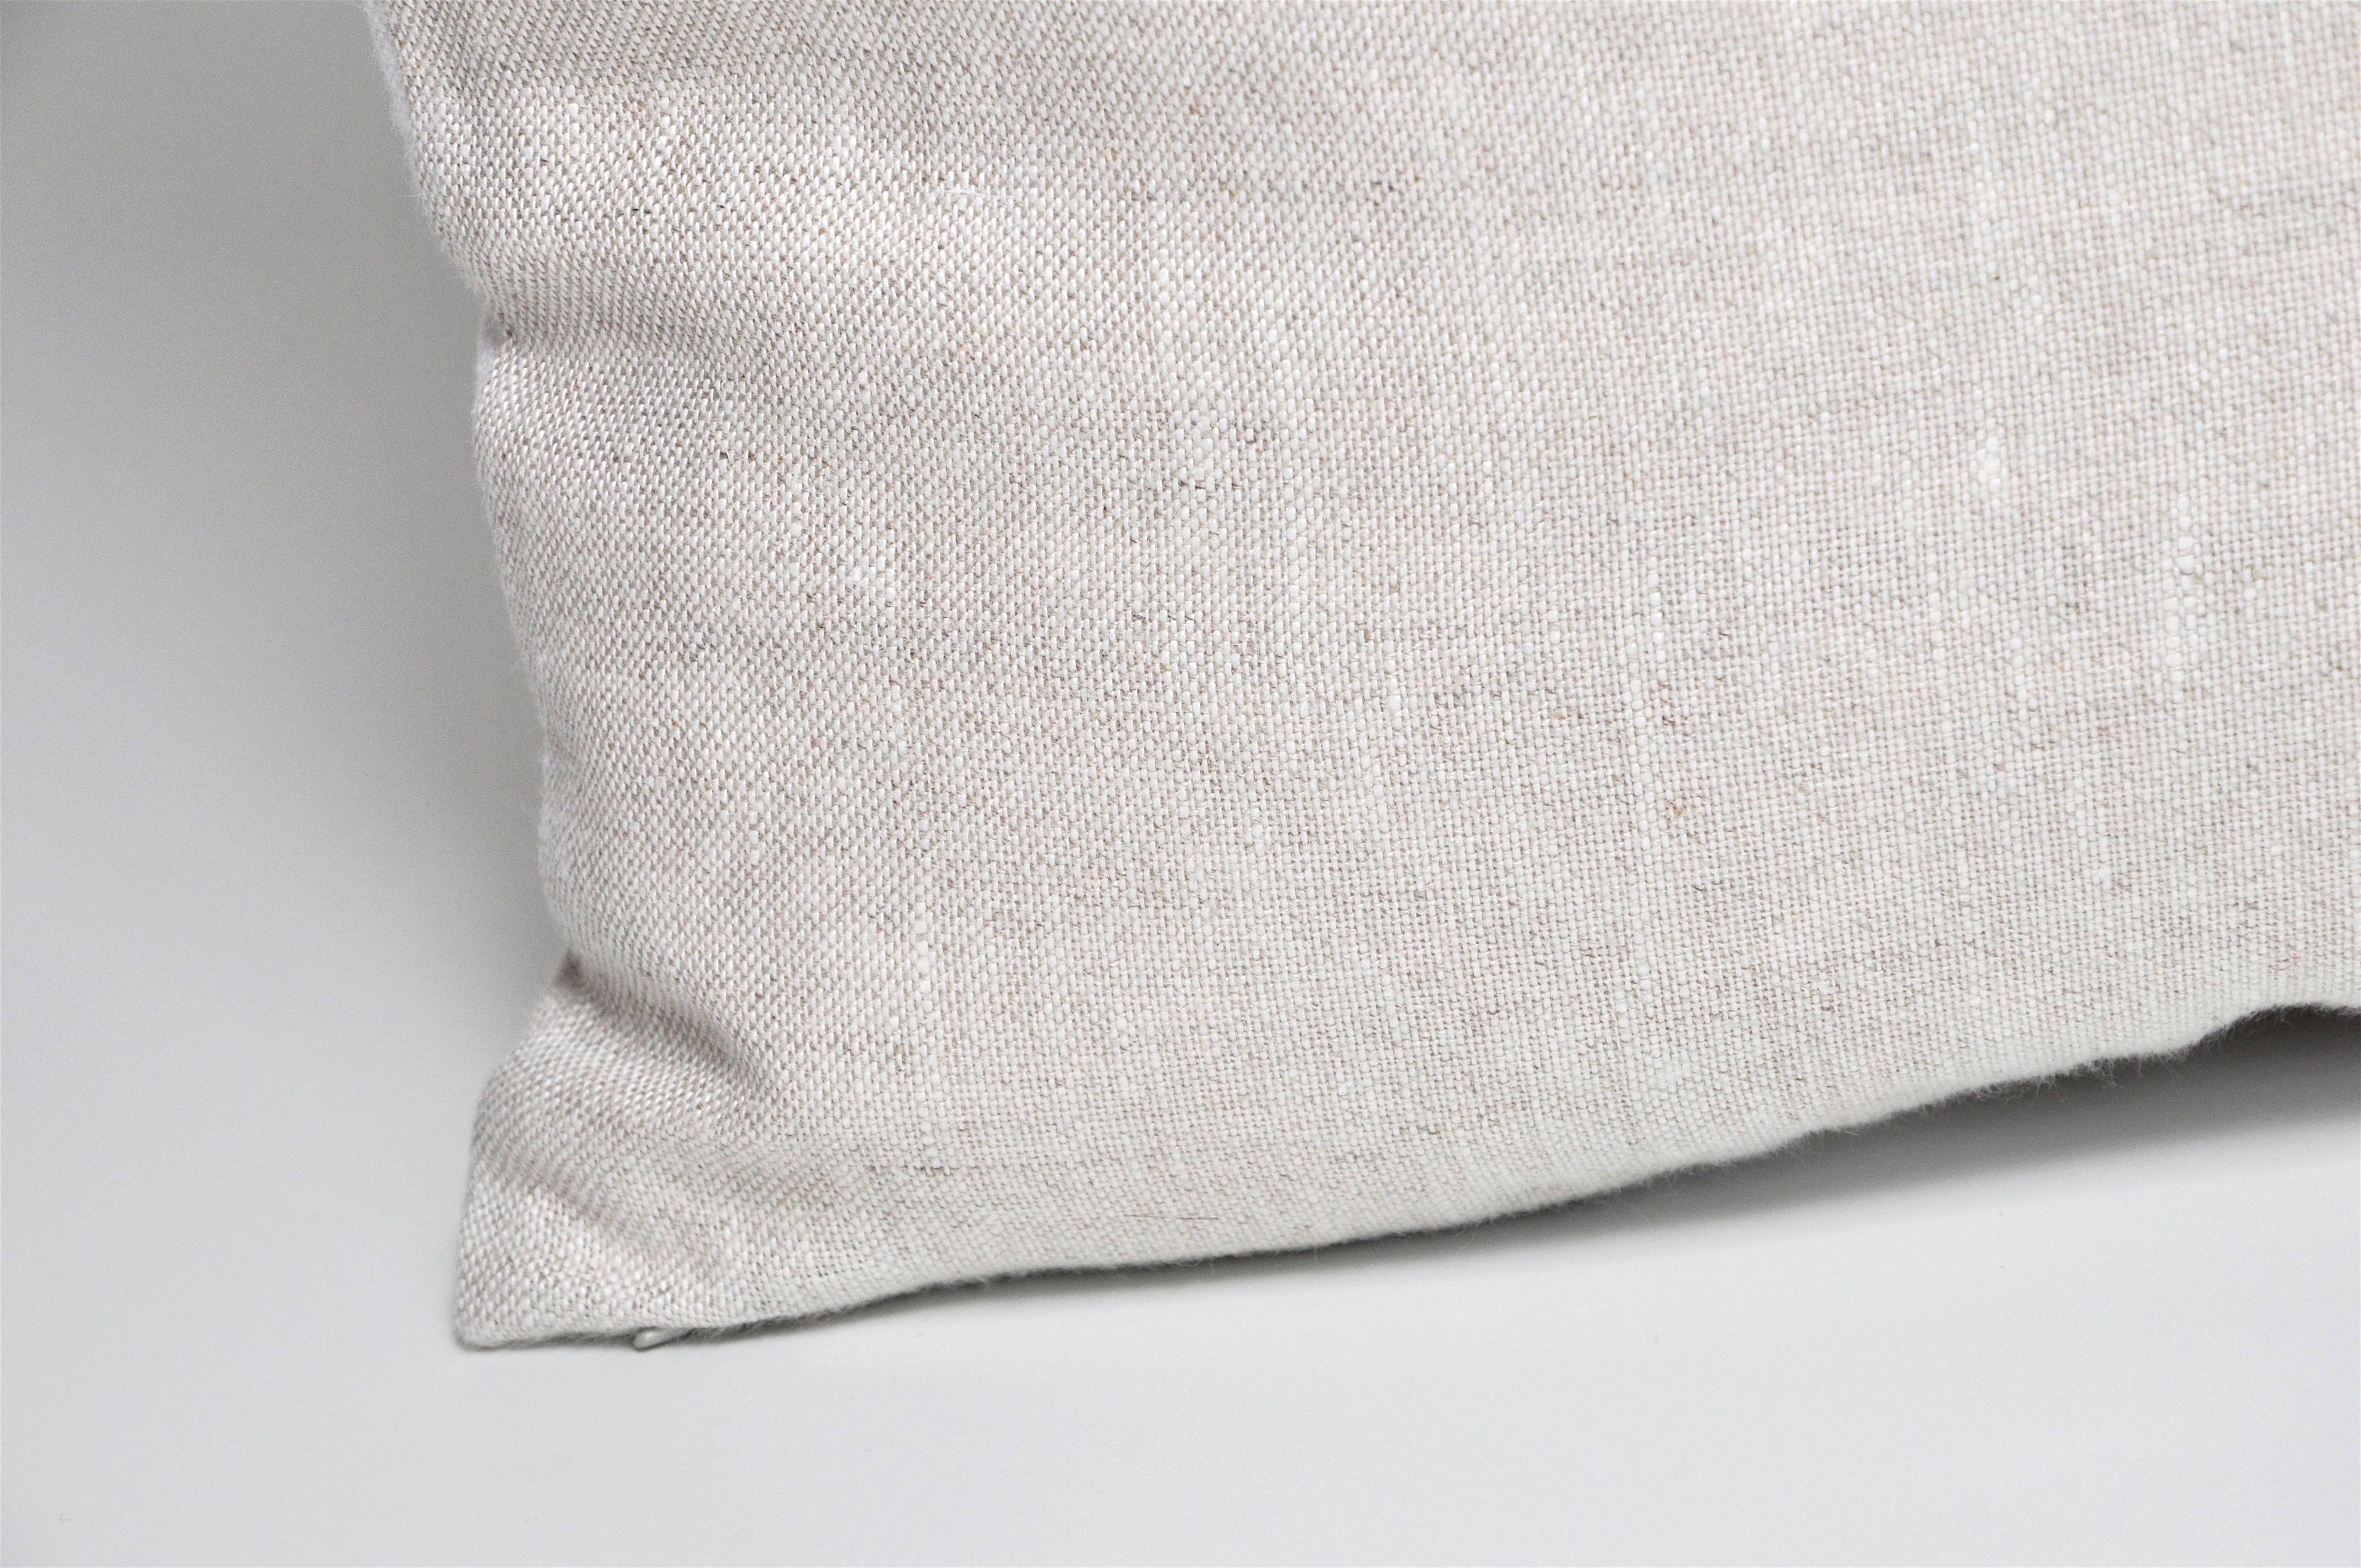 Northern Irish Pair of Large Contemporary Irish Linen Pillows Cushions White Natural Patchwork For Sale